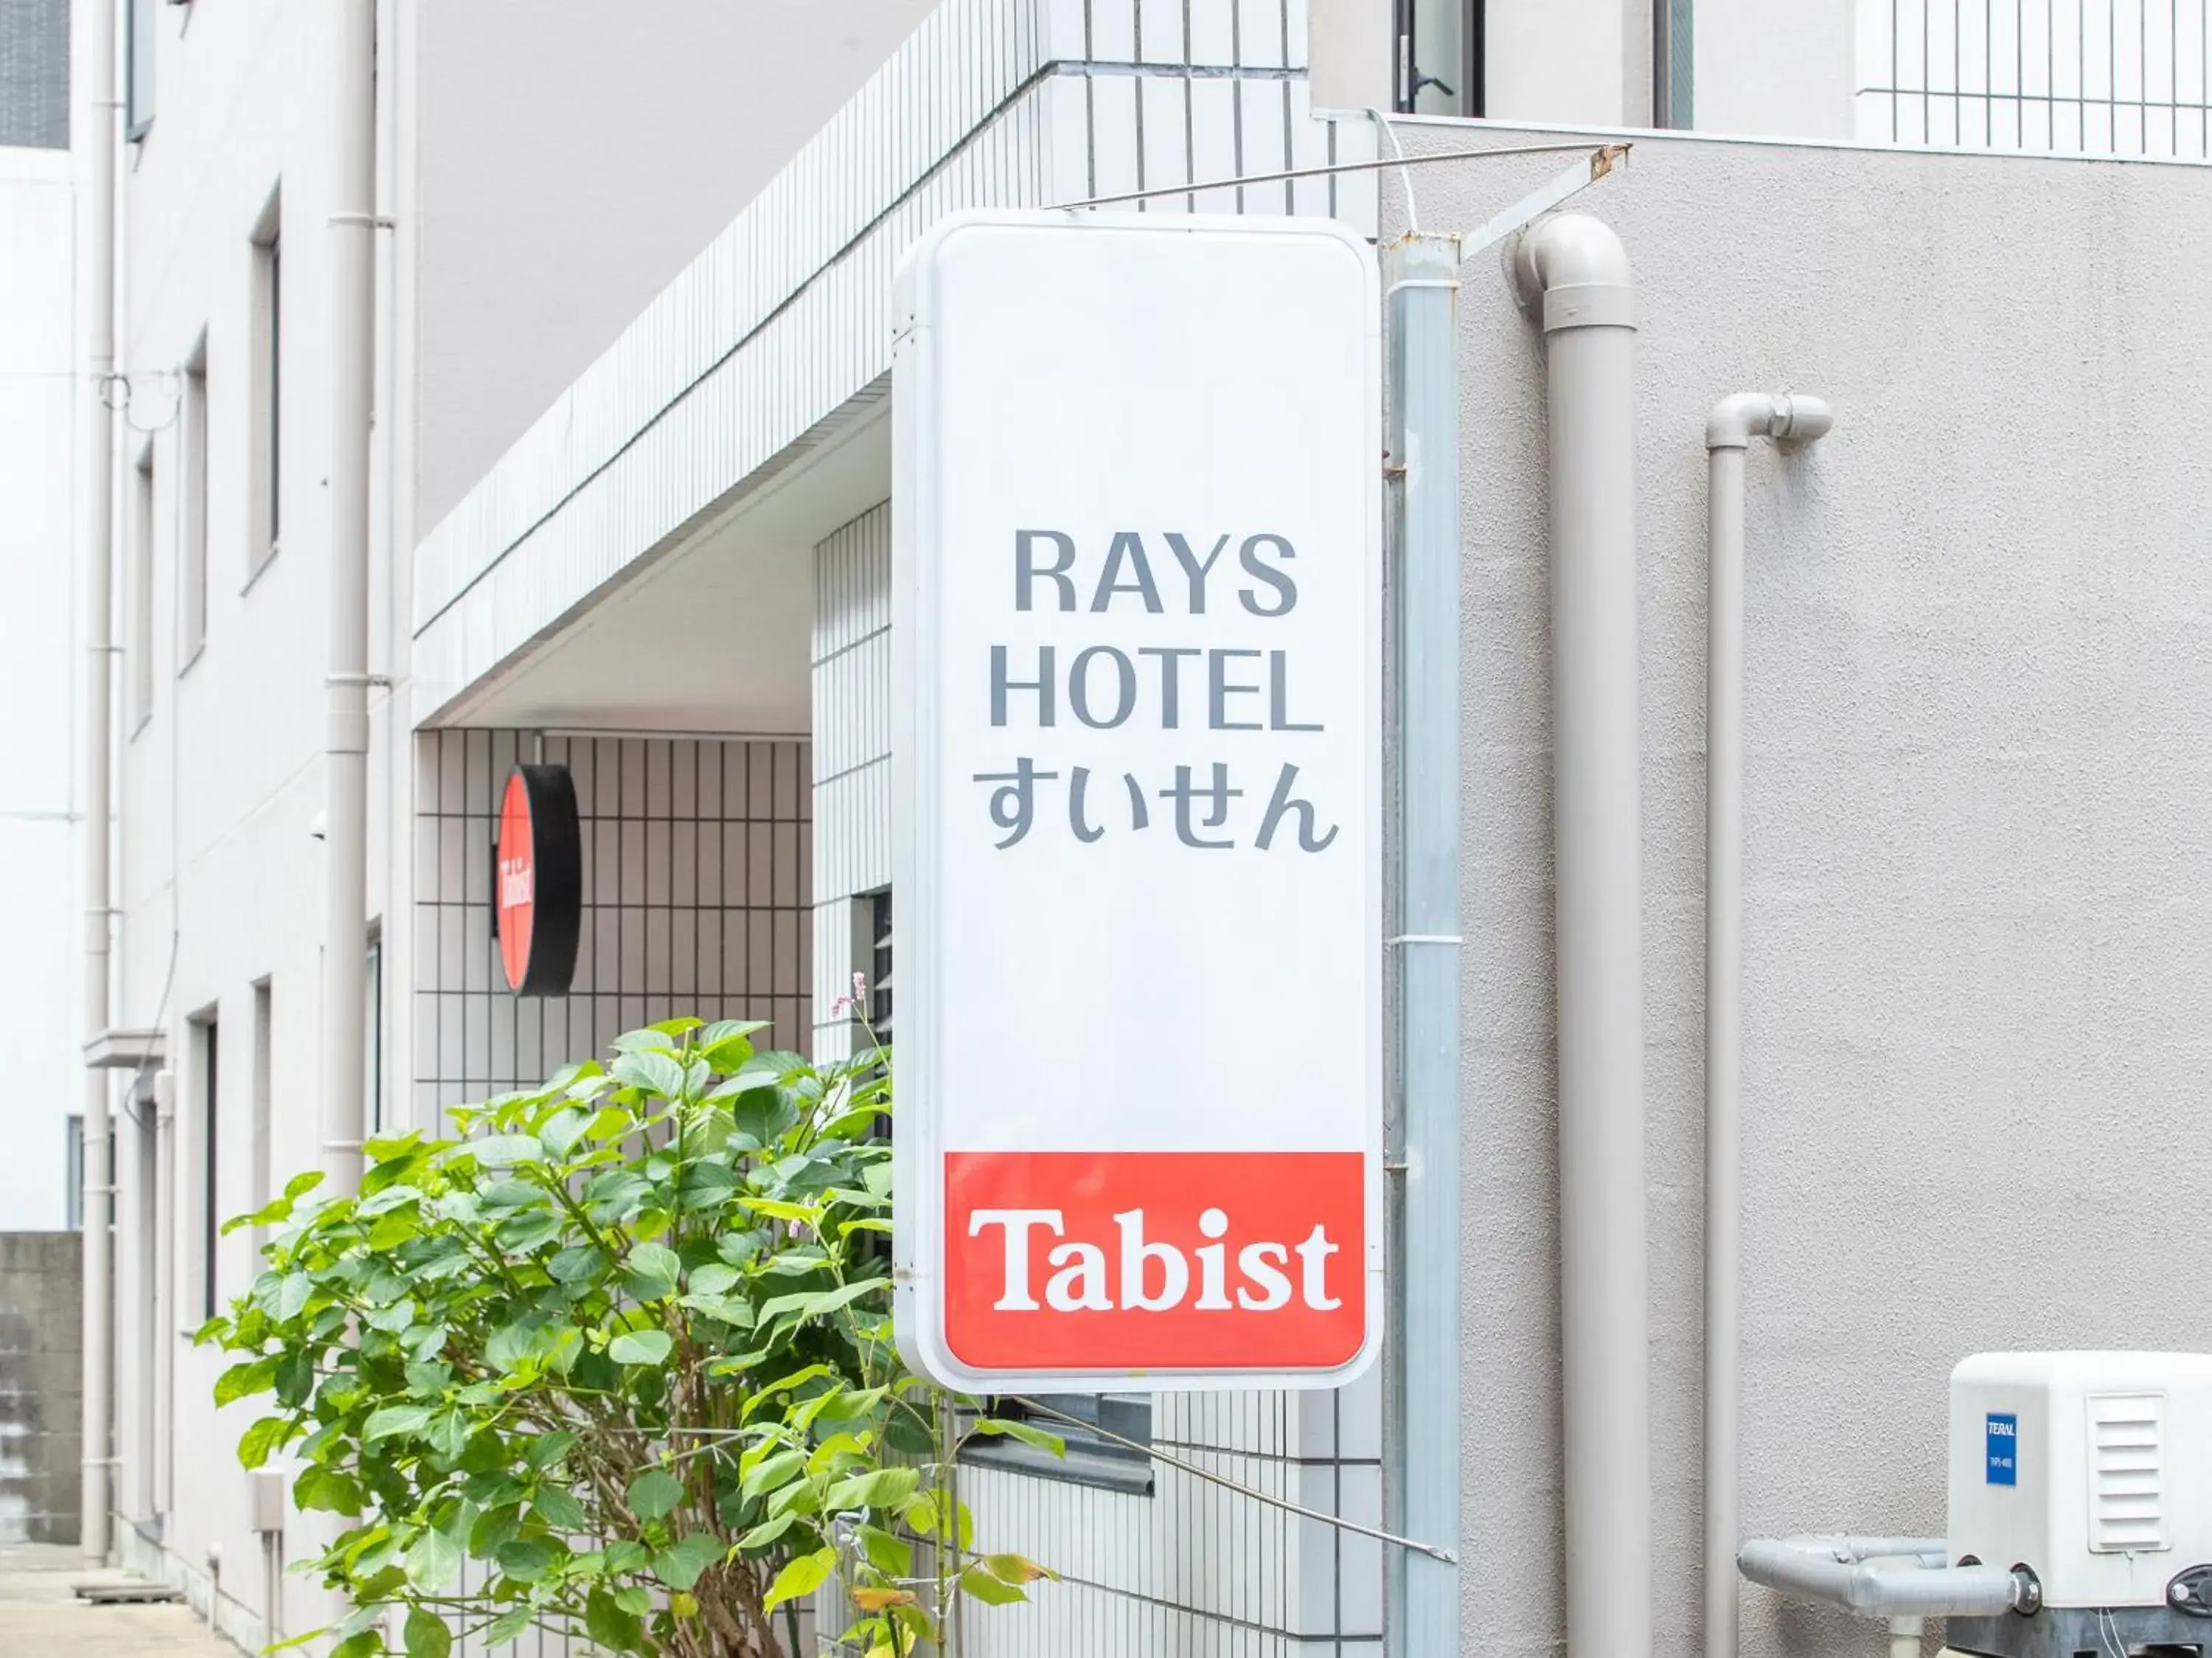 Property building in Tabist Rays Hotel Suisen